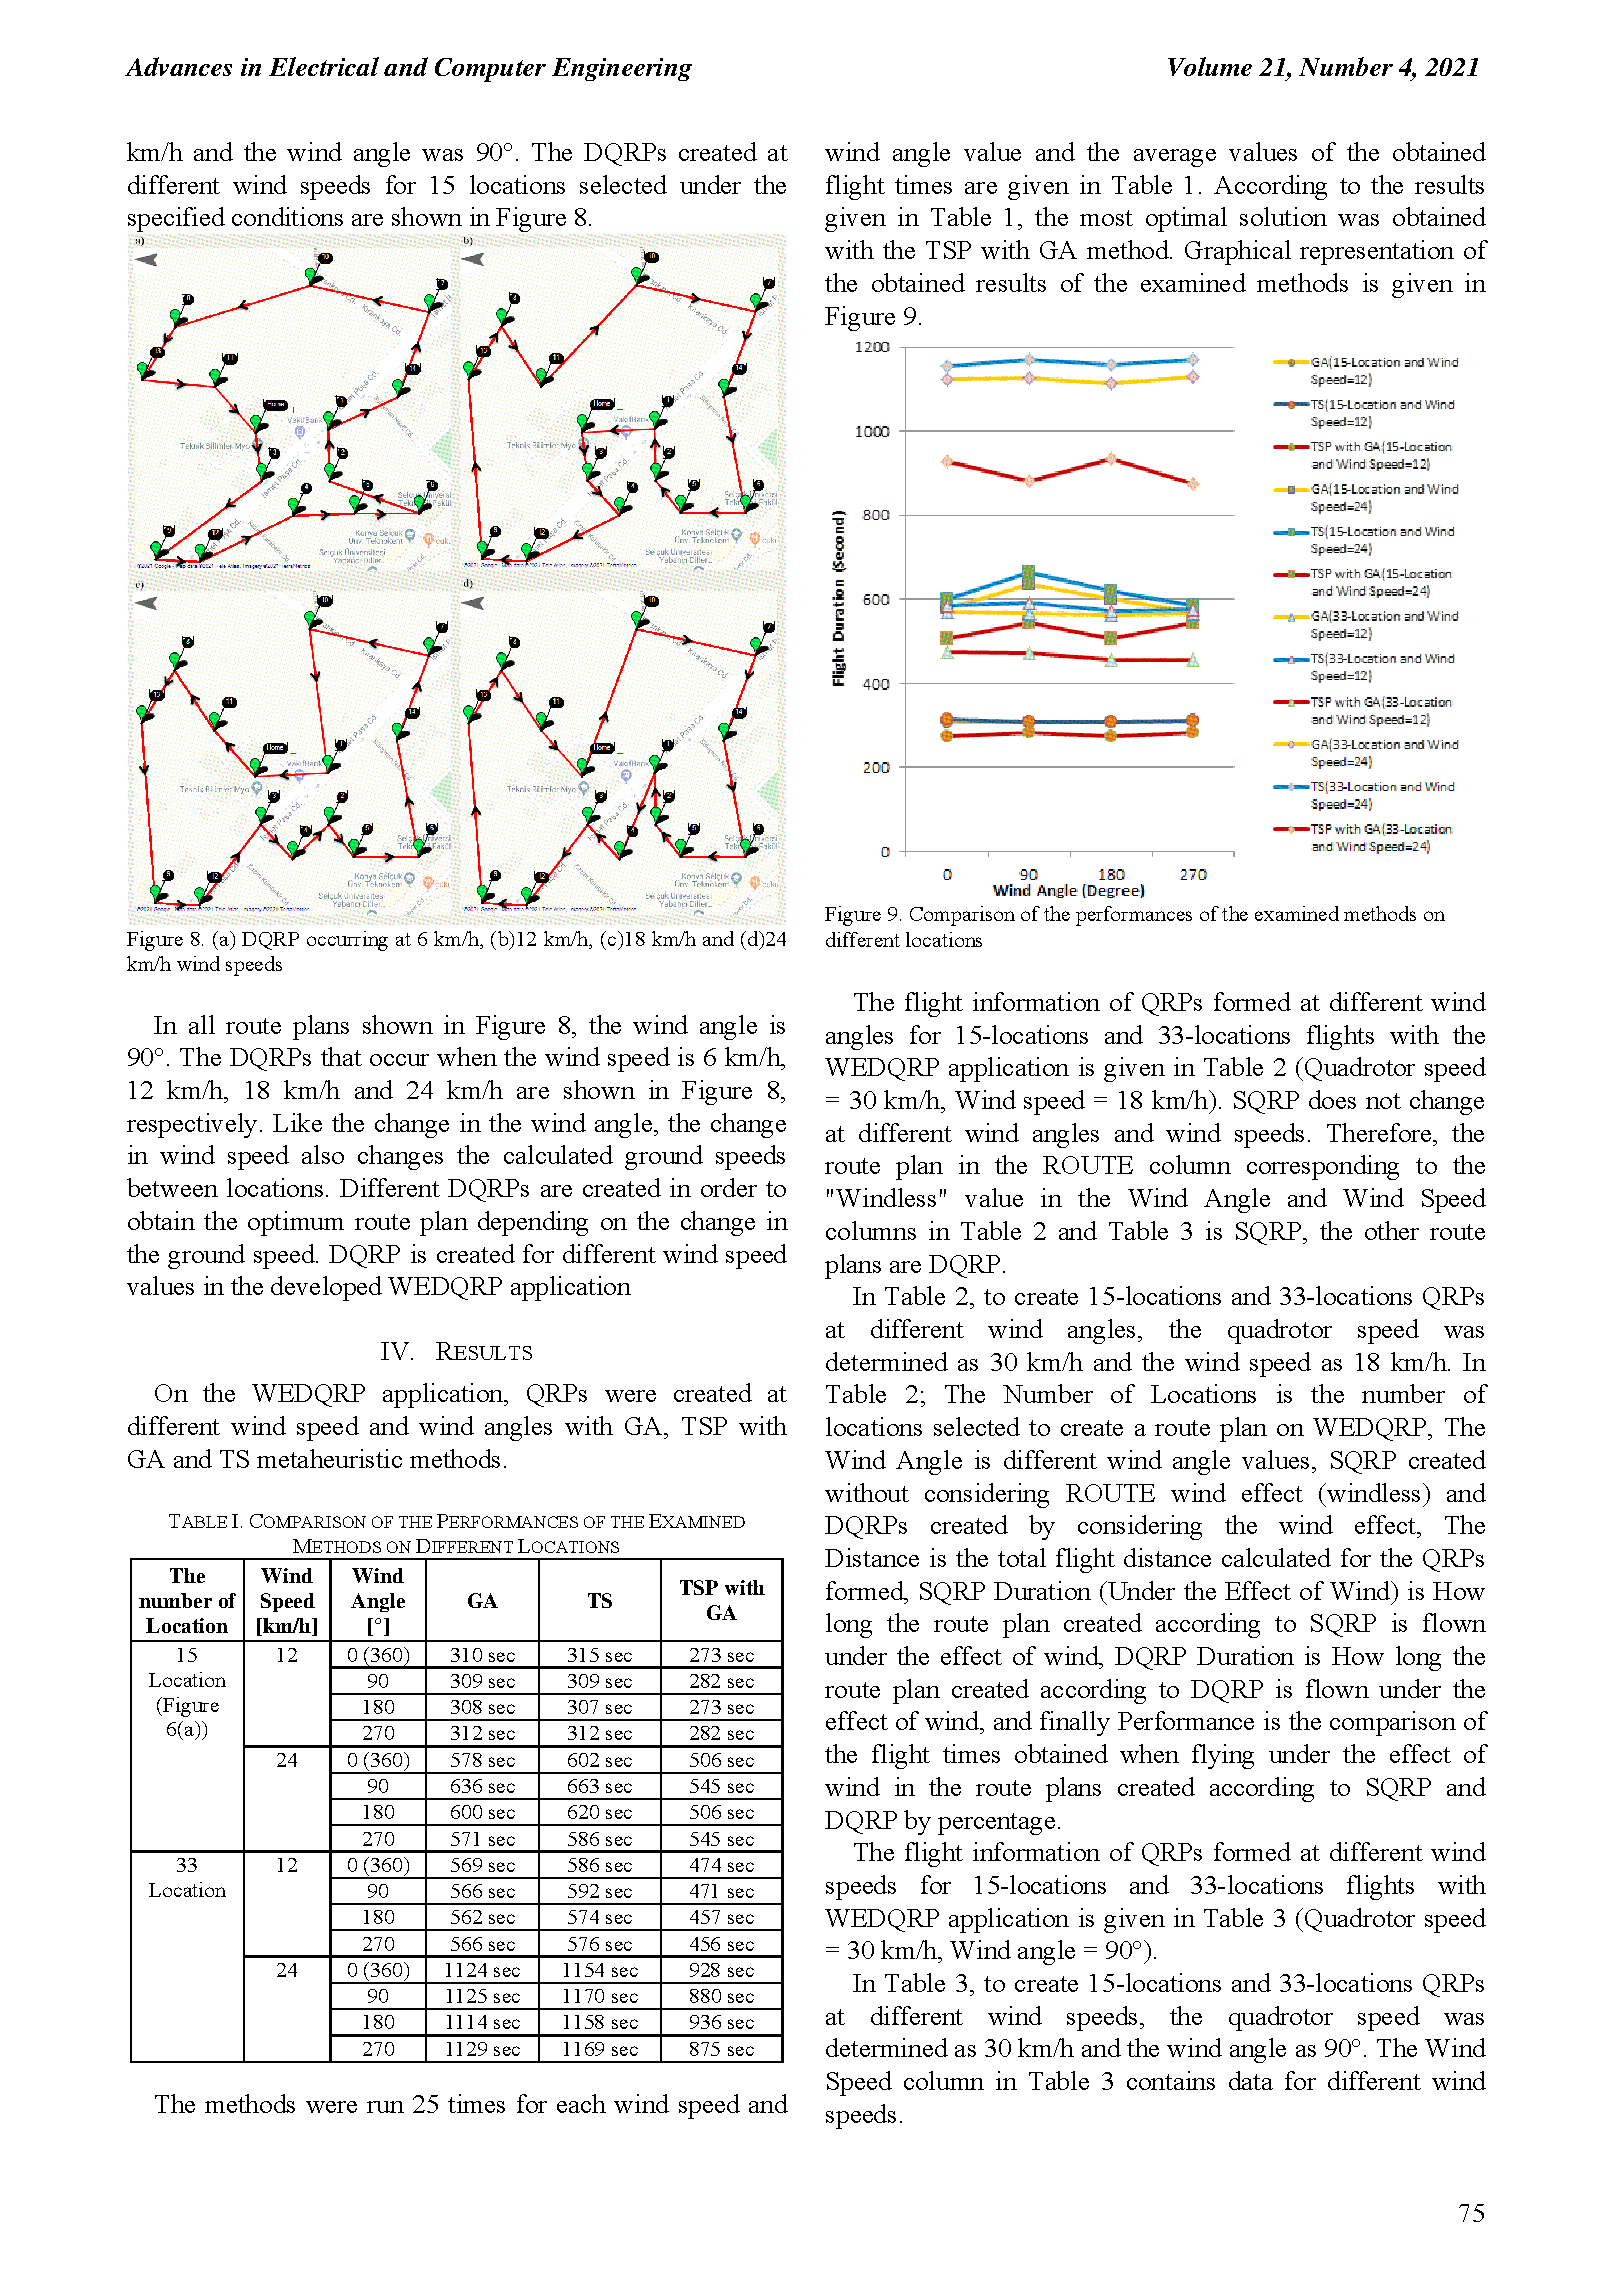 PDF Quickview for paper with DOI:10.4316/AECE.2021.04008